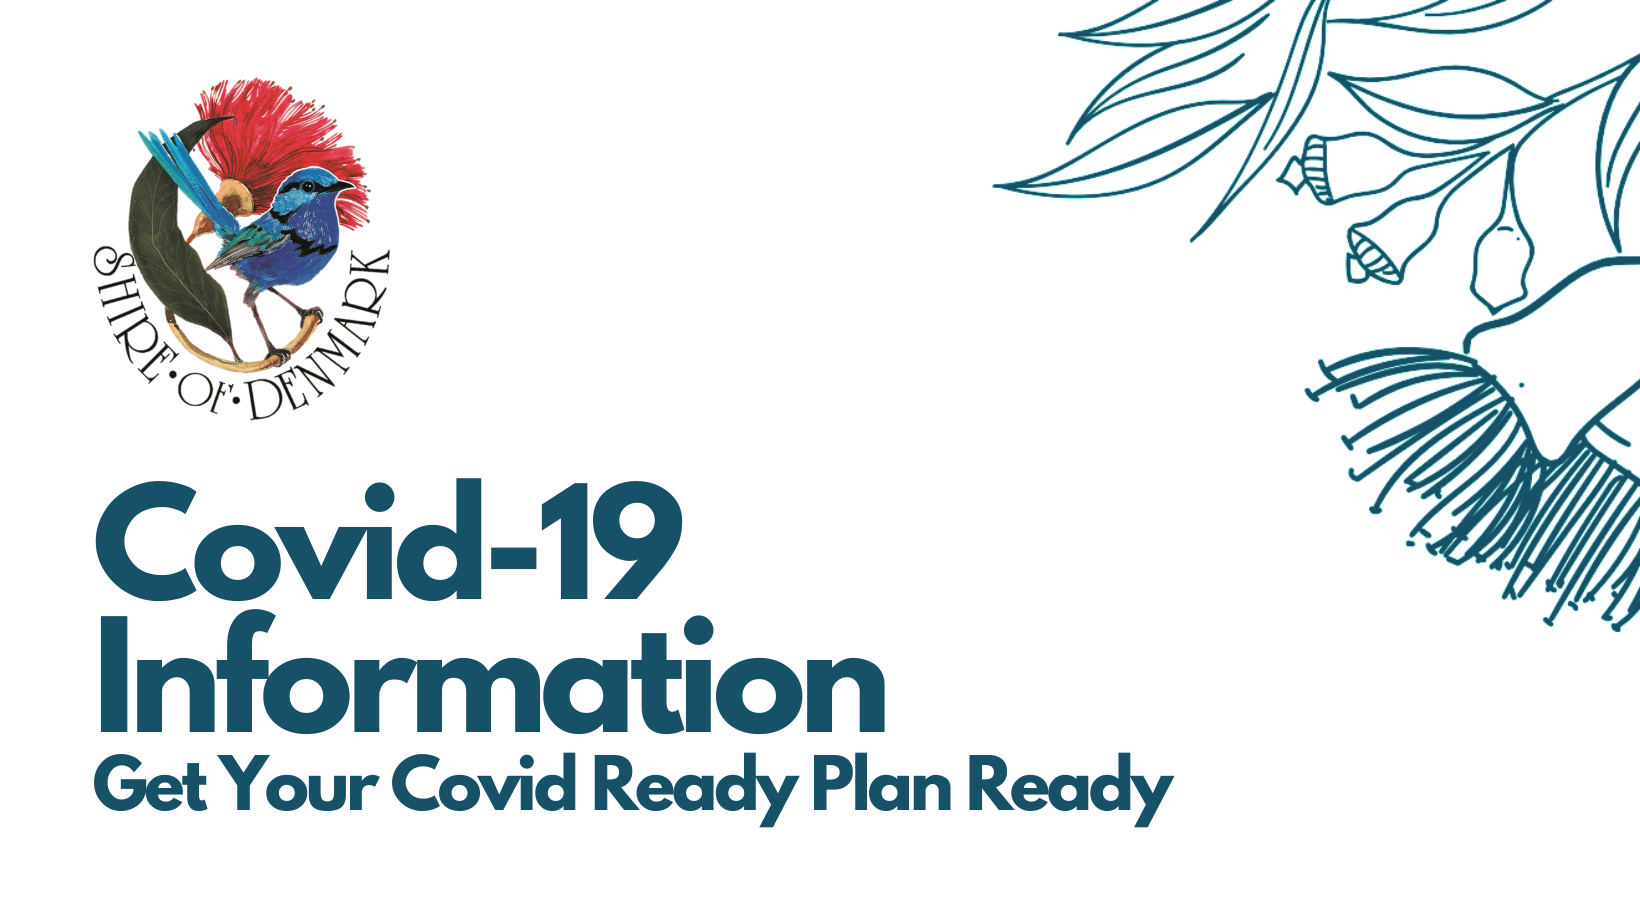 Prepare your Covid19 Ready Plan Today